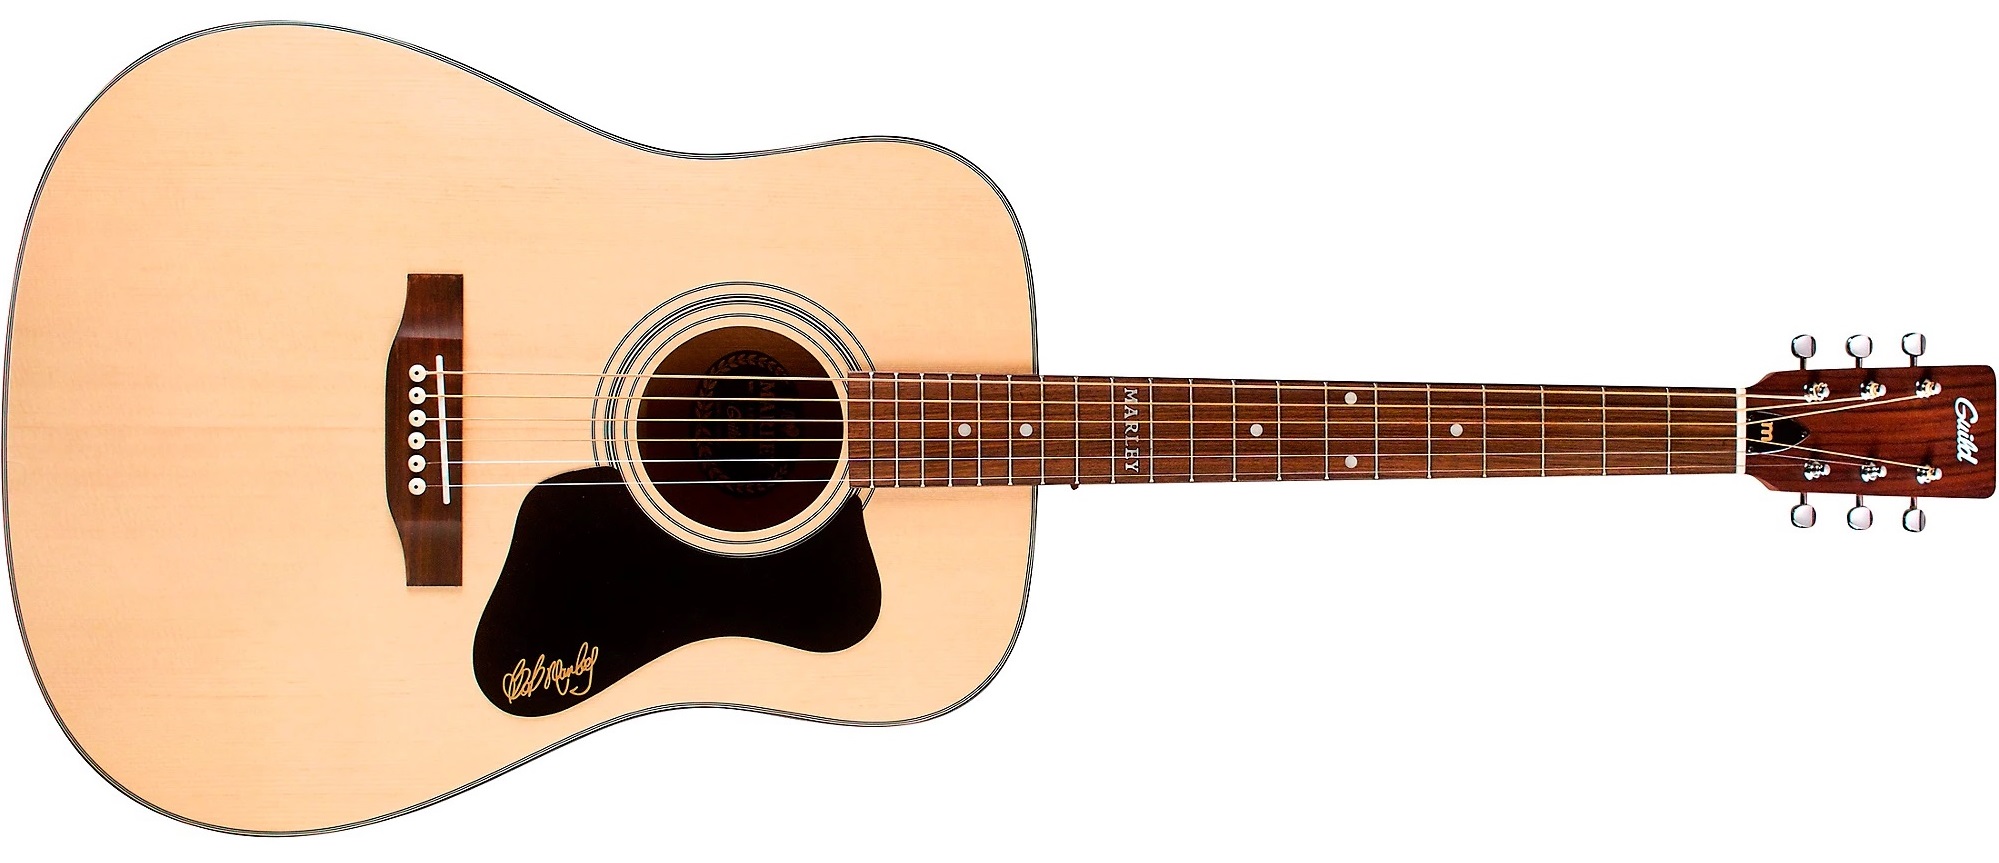 Guild A-20 Marley Acoustic Guitar on a white background